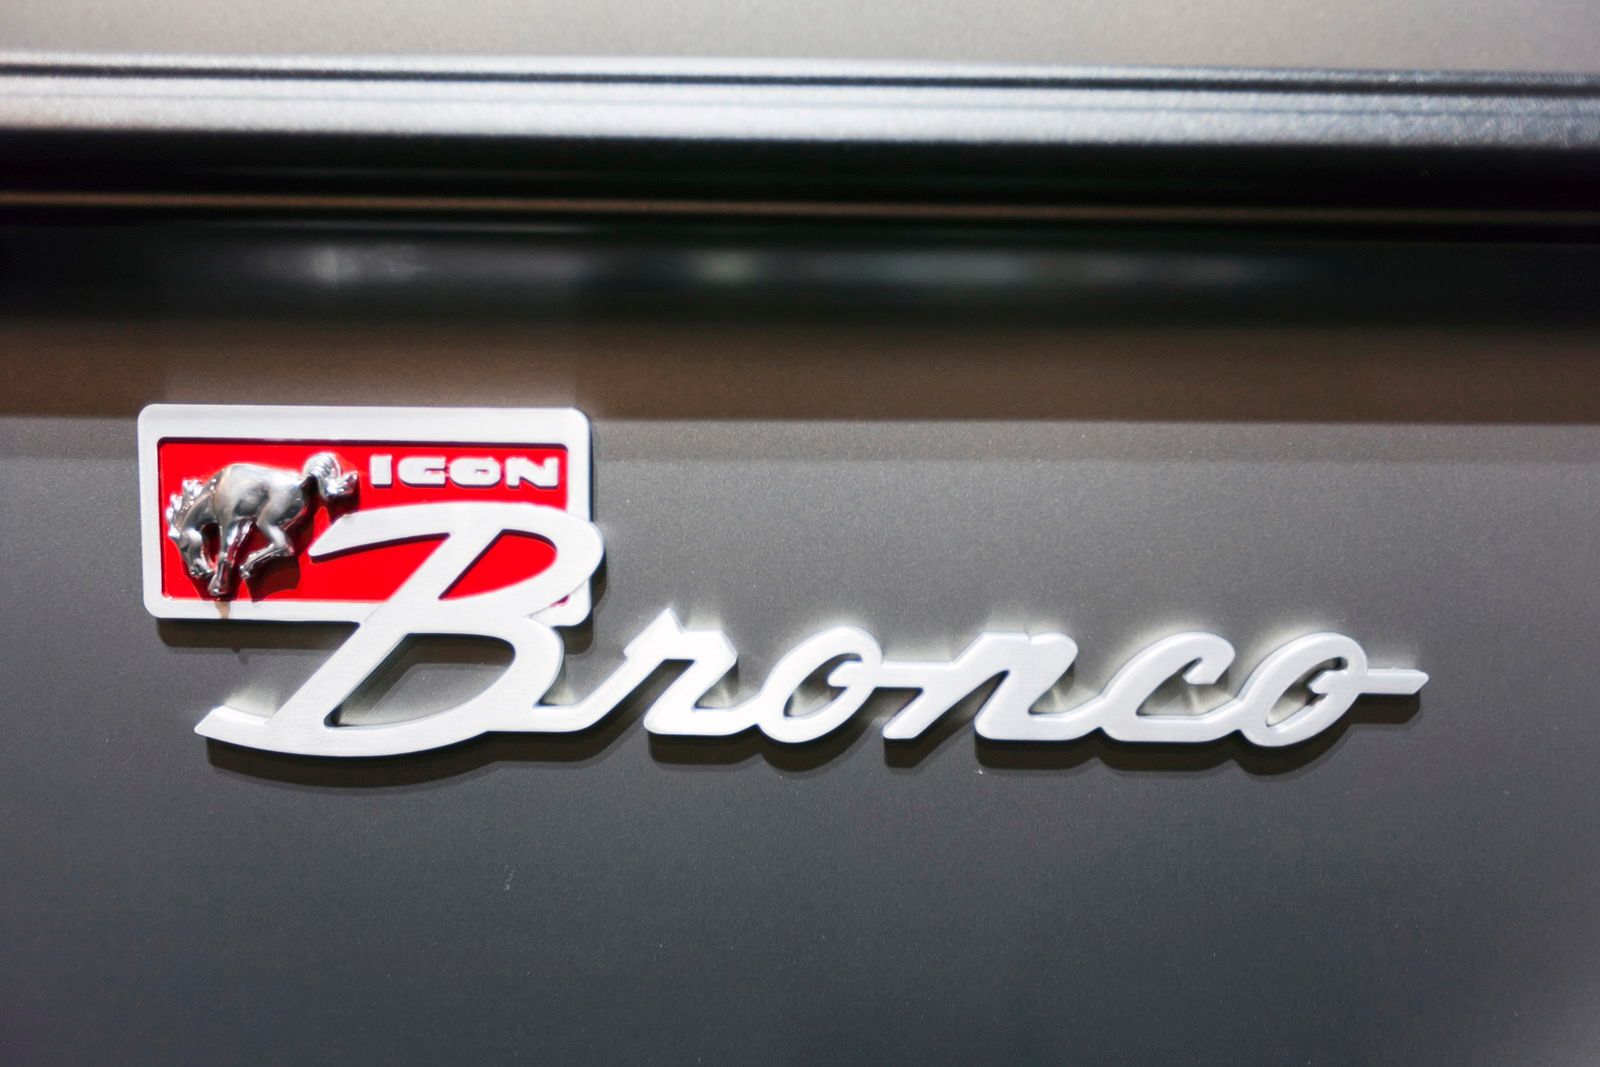 1996 Ford Icon Bronco